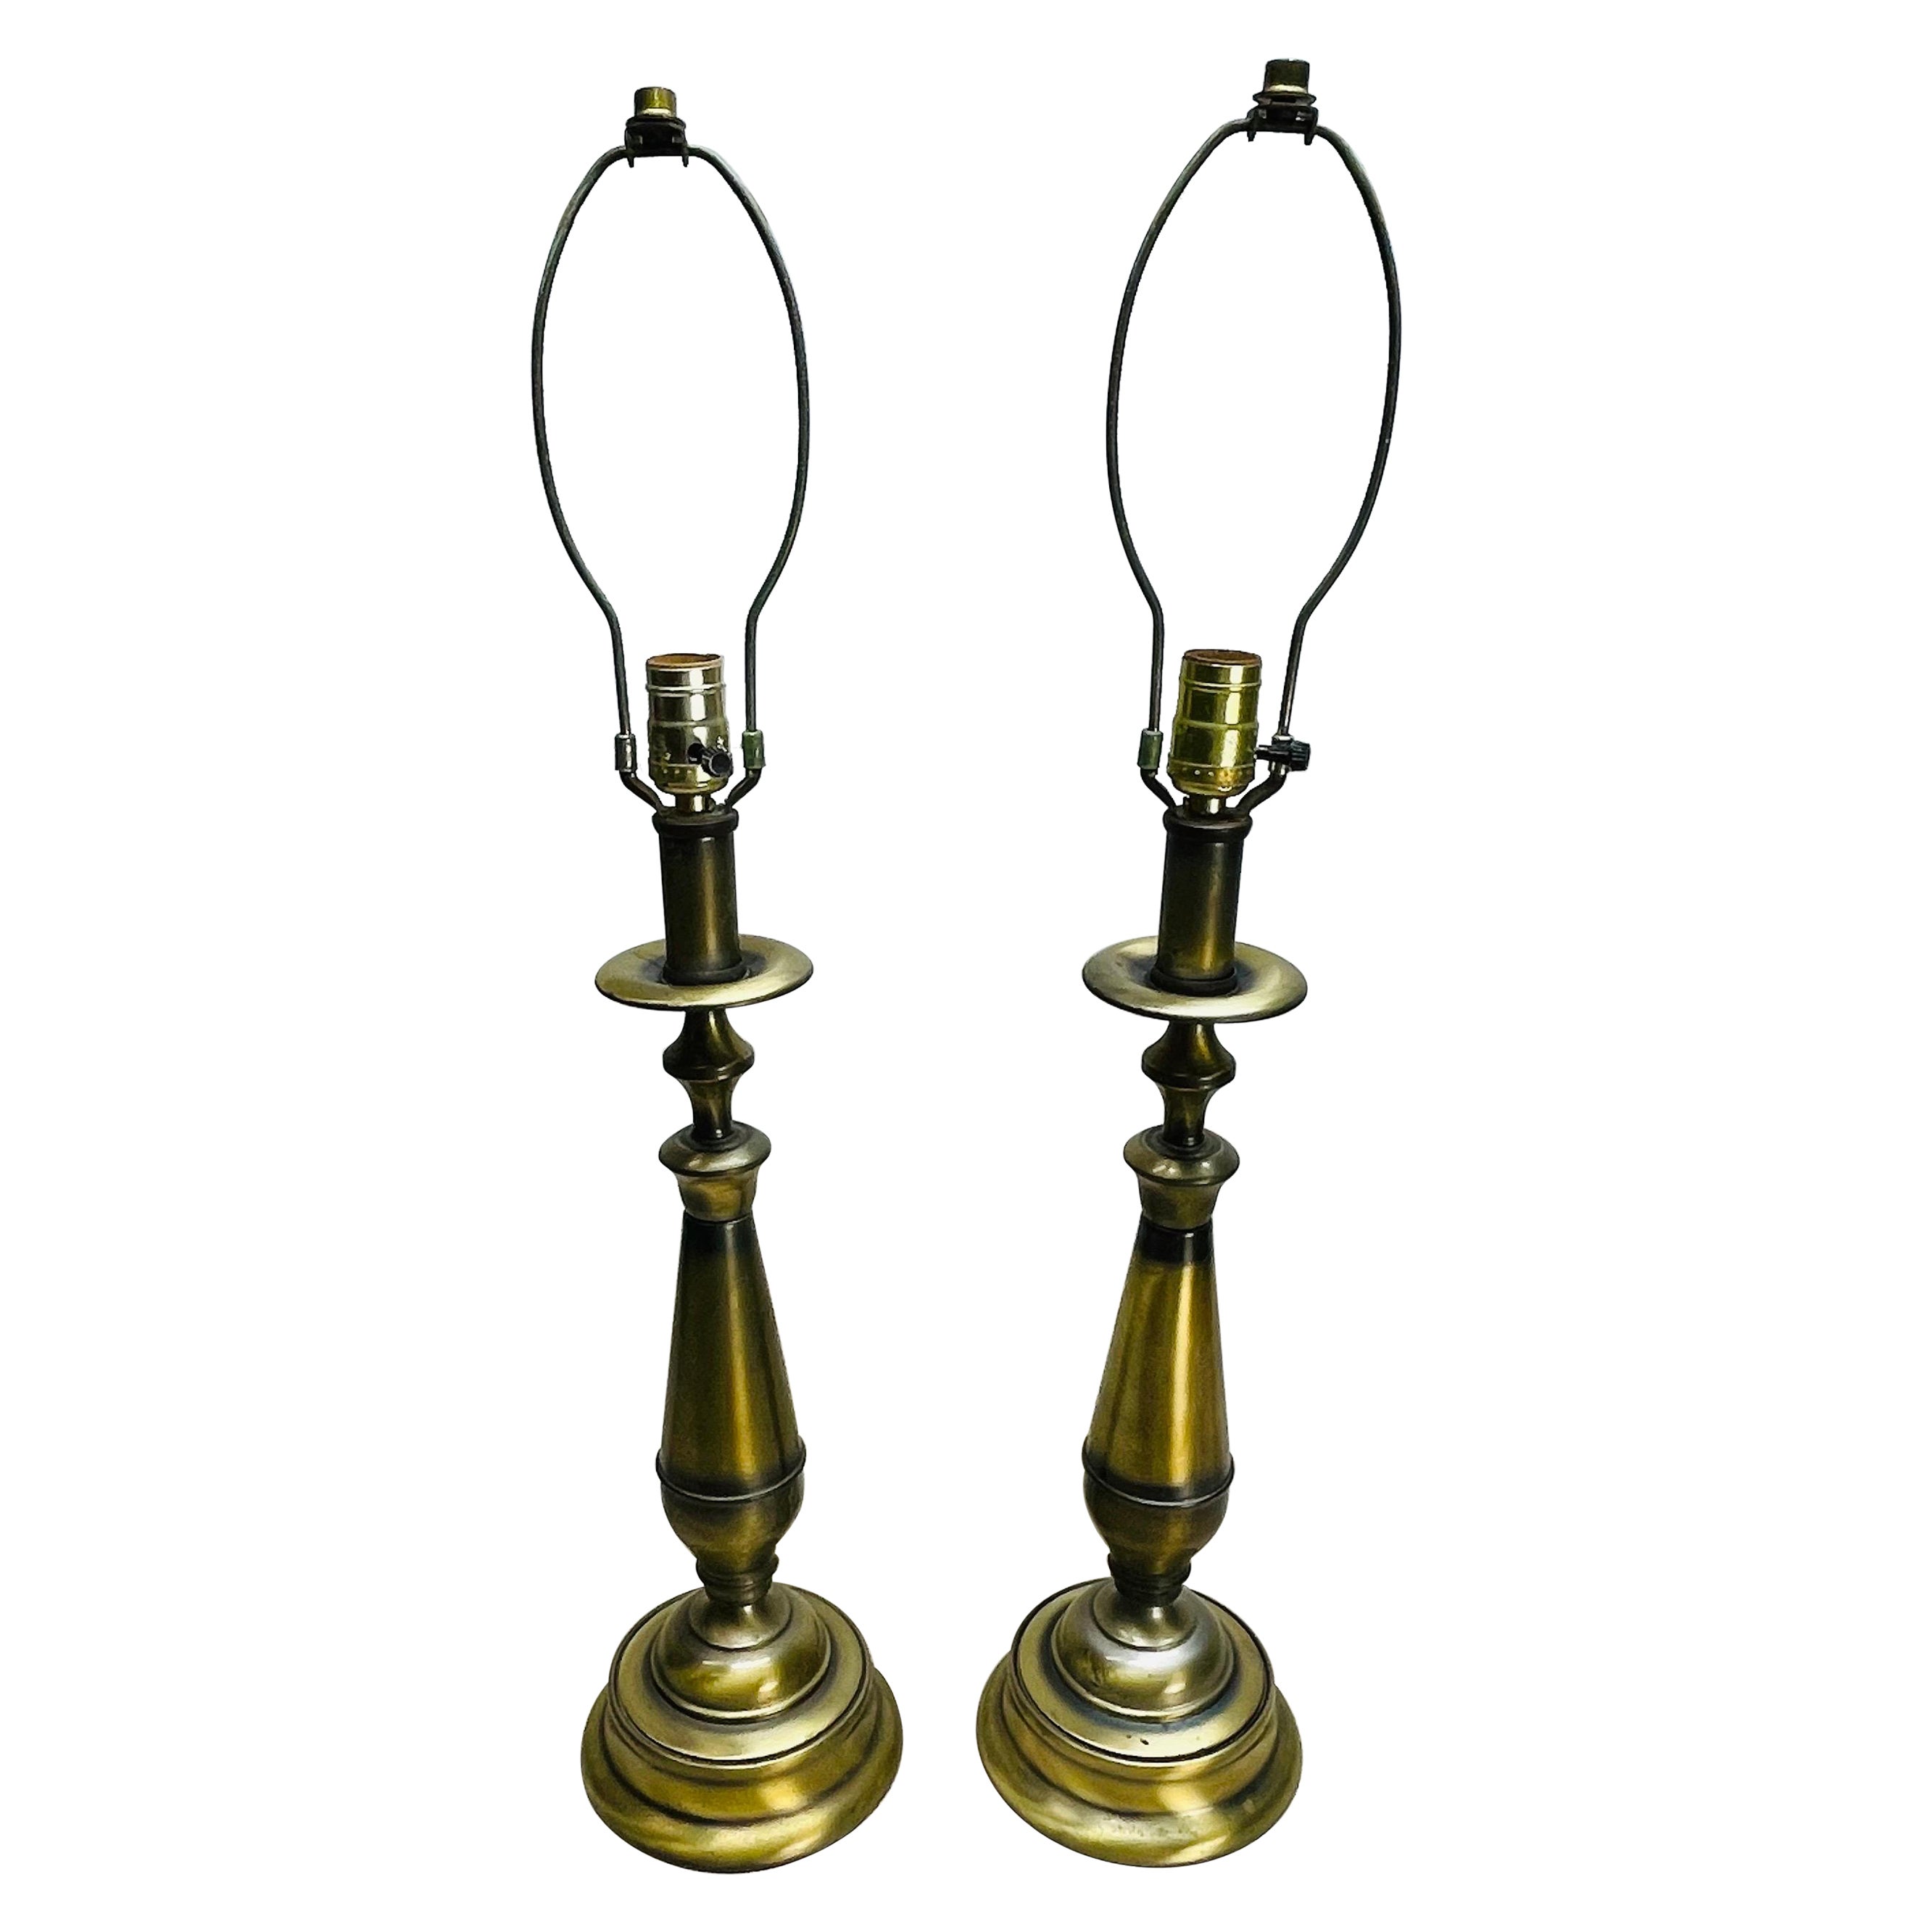 1960s Brushed Brass Table Lamps, Pair